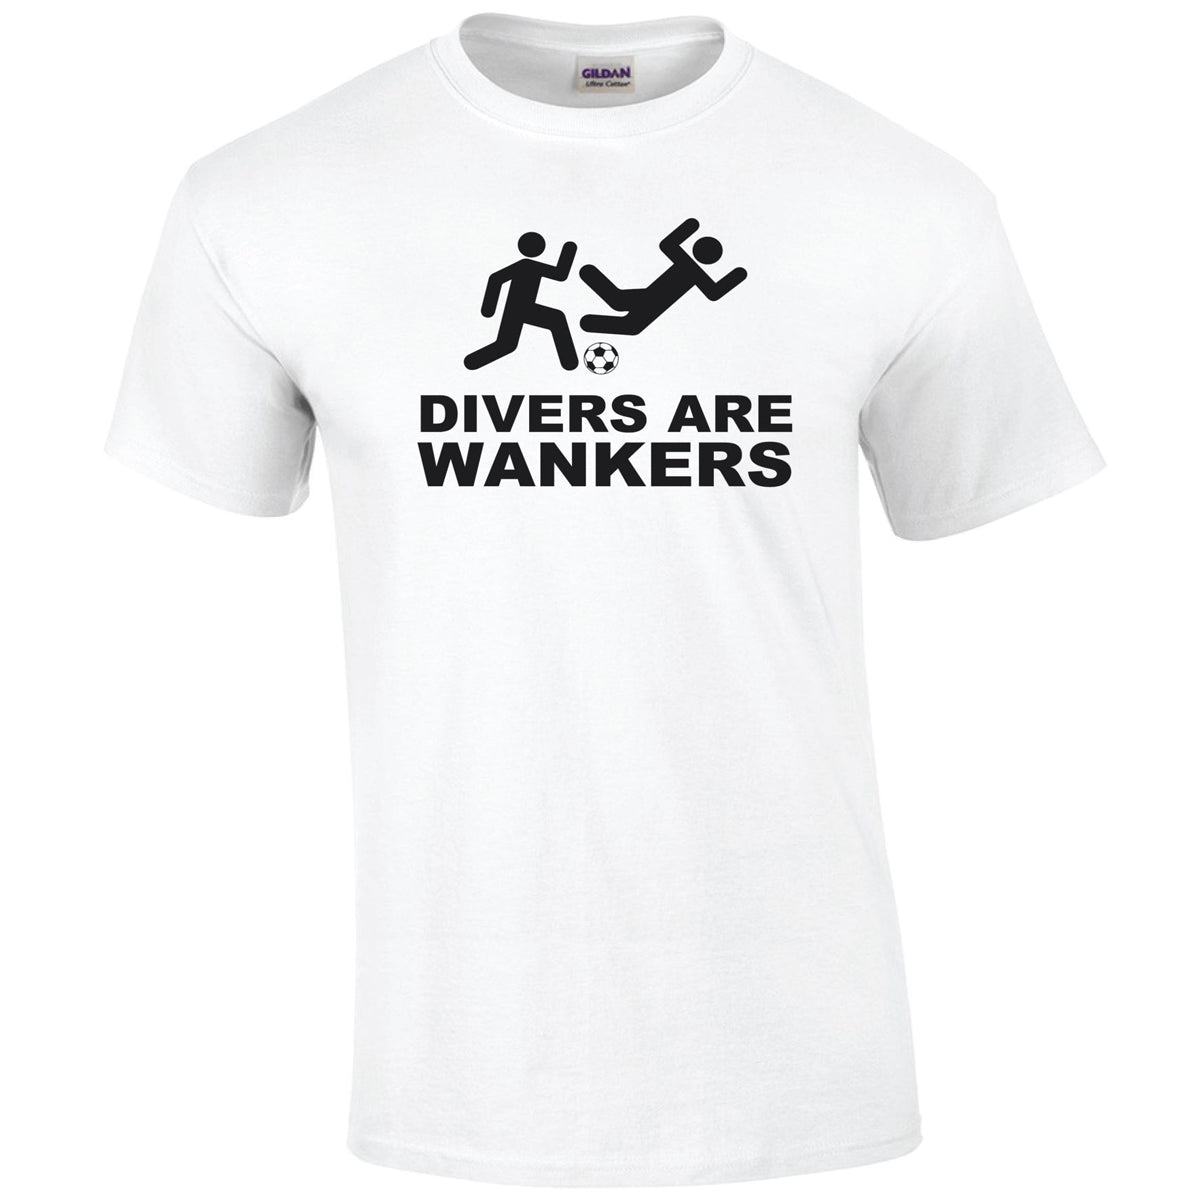 Divers Are Wankers Soccer T-Shirt T-shirts 411 Youth Medium White Youth